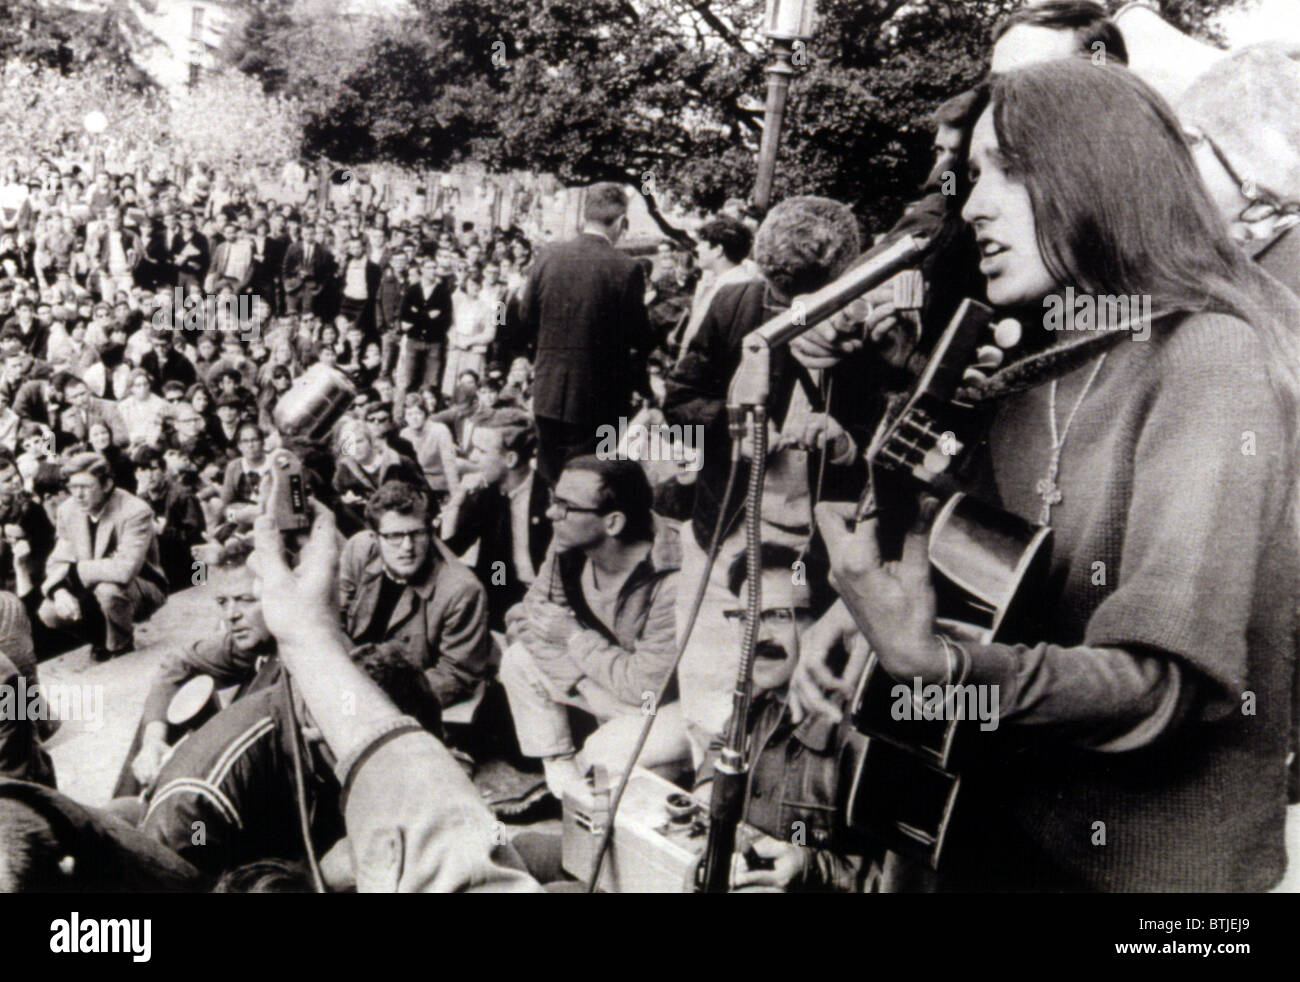 12-2-64 BERKELEY, CALIf.: Folk singer Joan Baez strums her guitar and sings freedom songs during a sit-in at the University of C Stock Photo